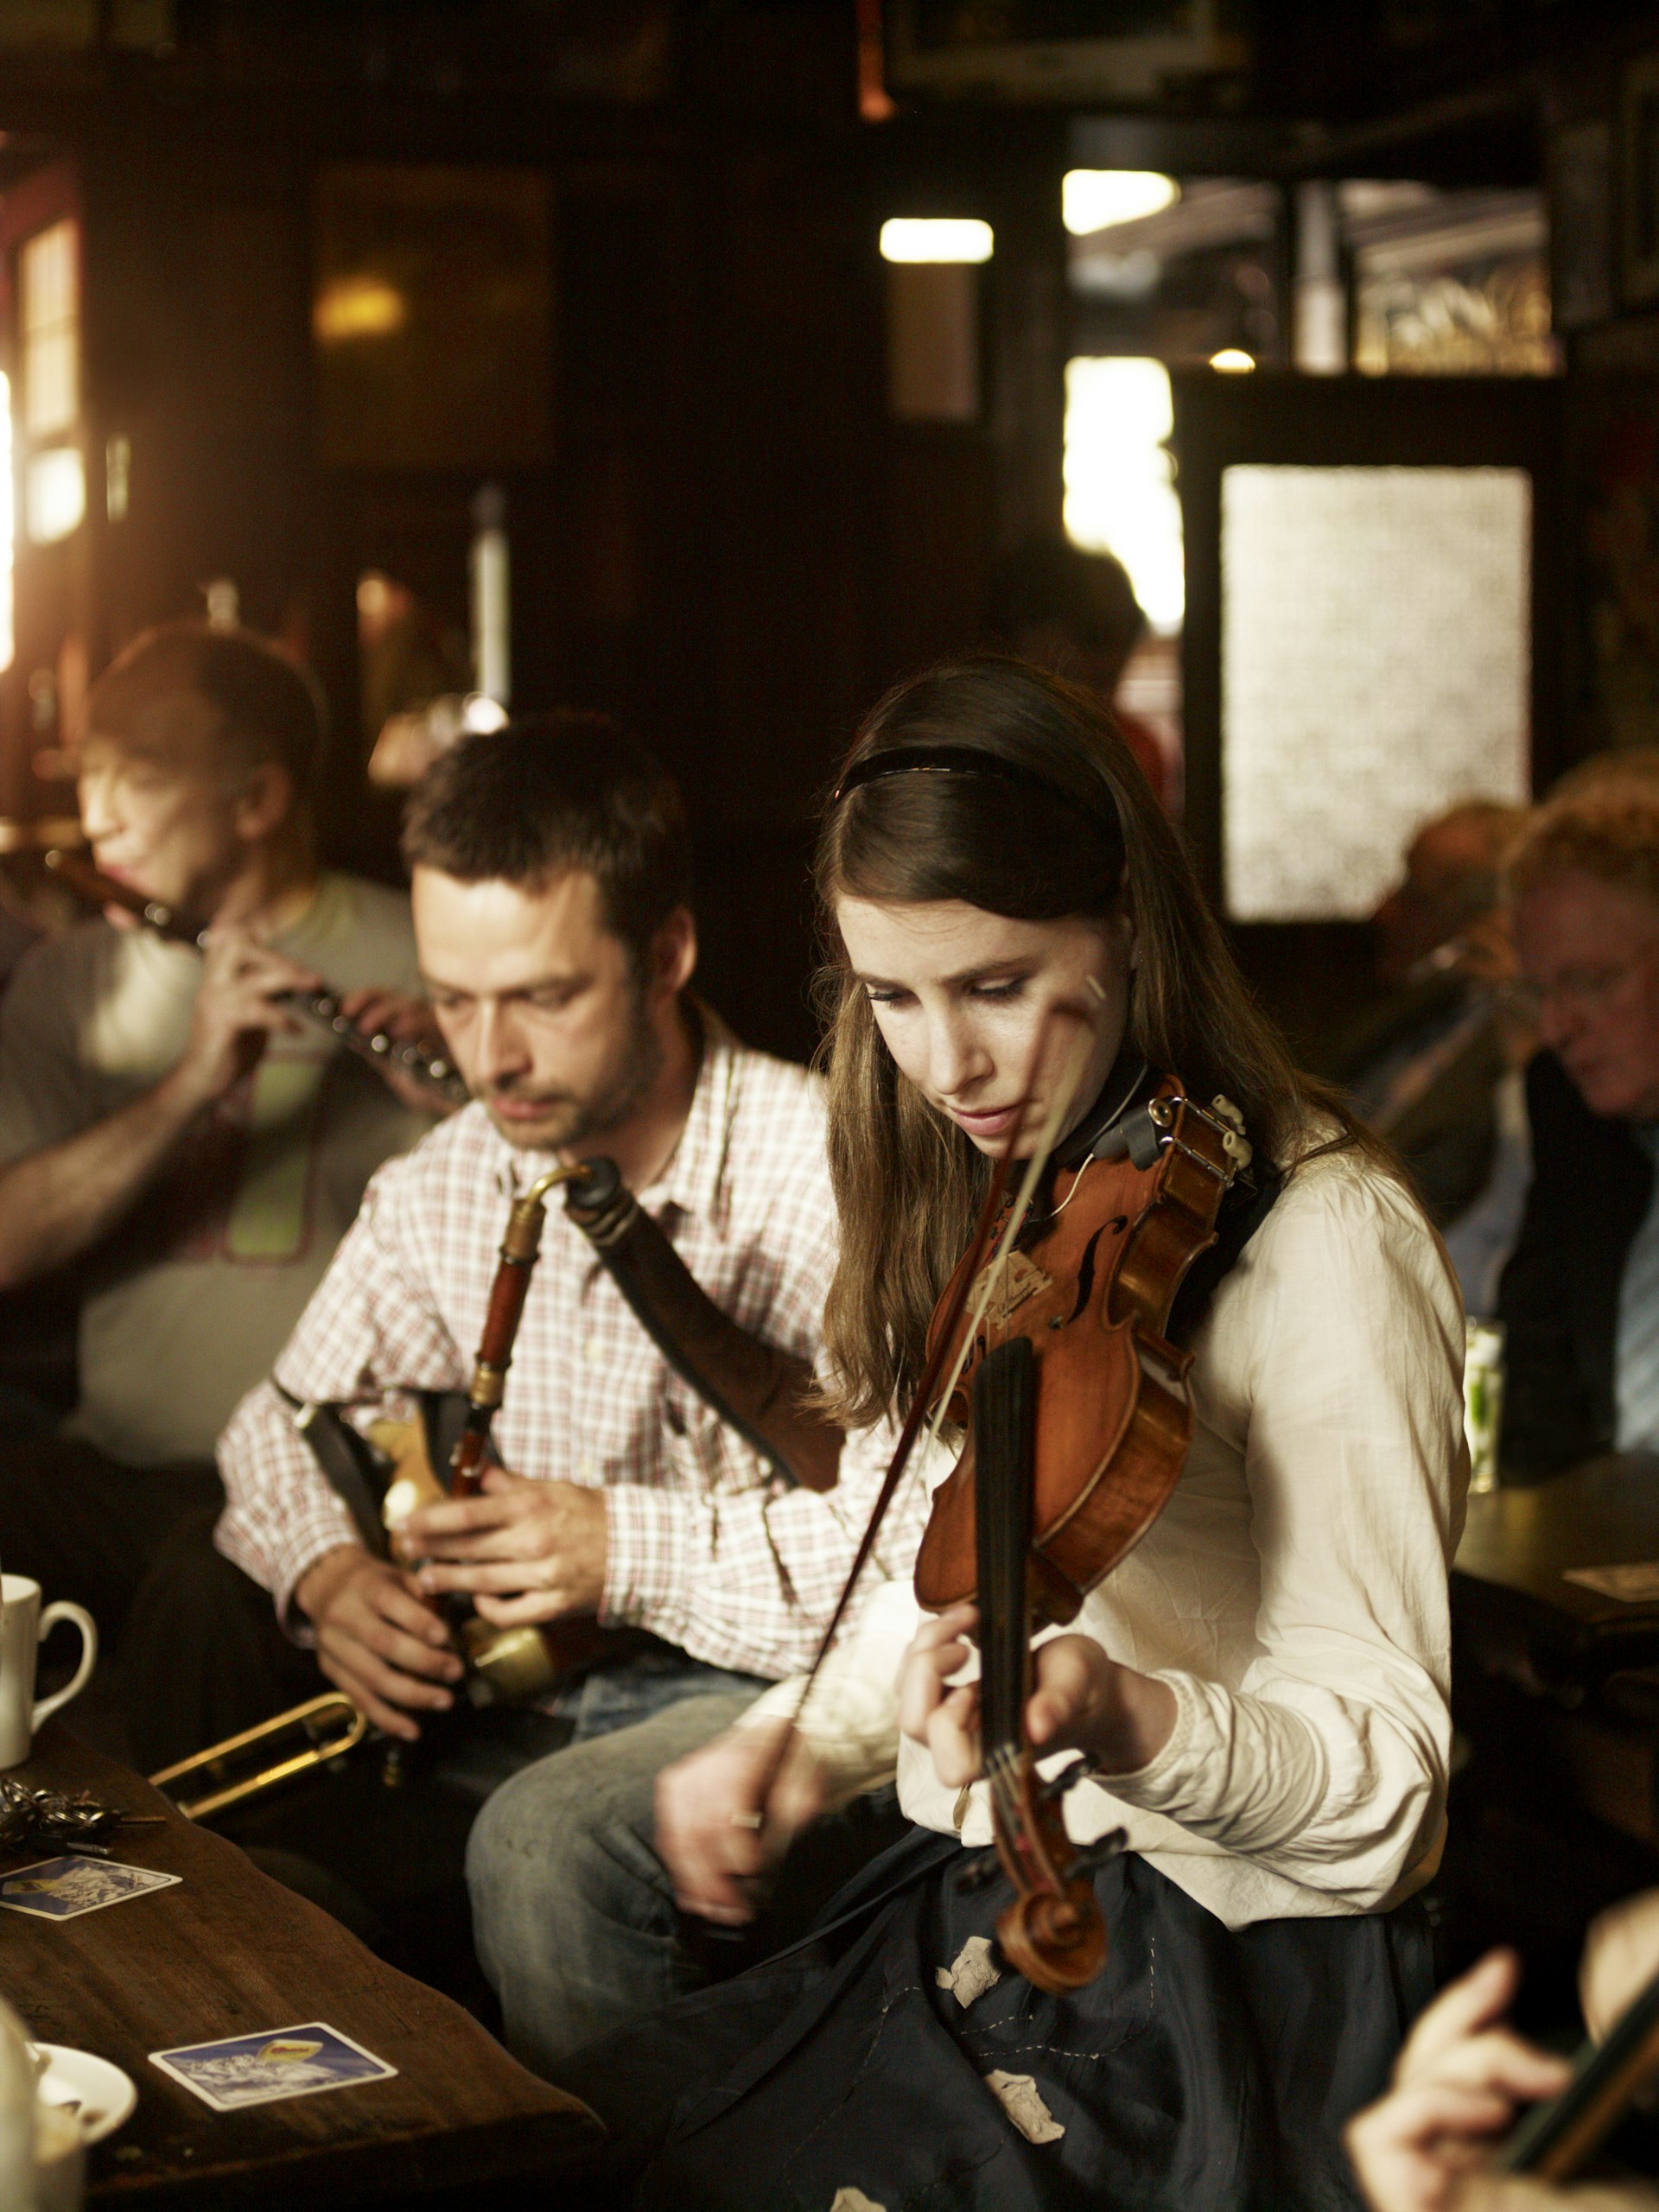 A woman playing the violin and a man playing the uilleann pipes in a pub